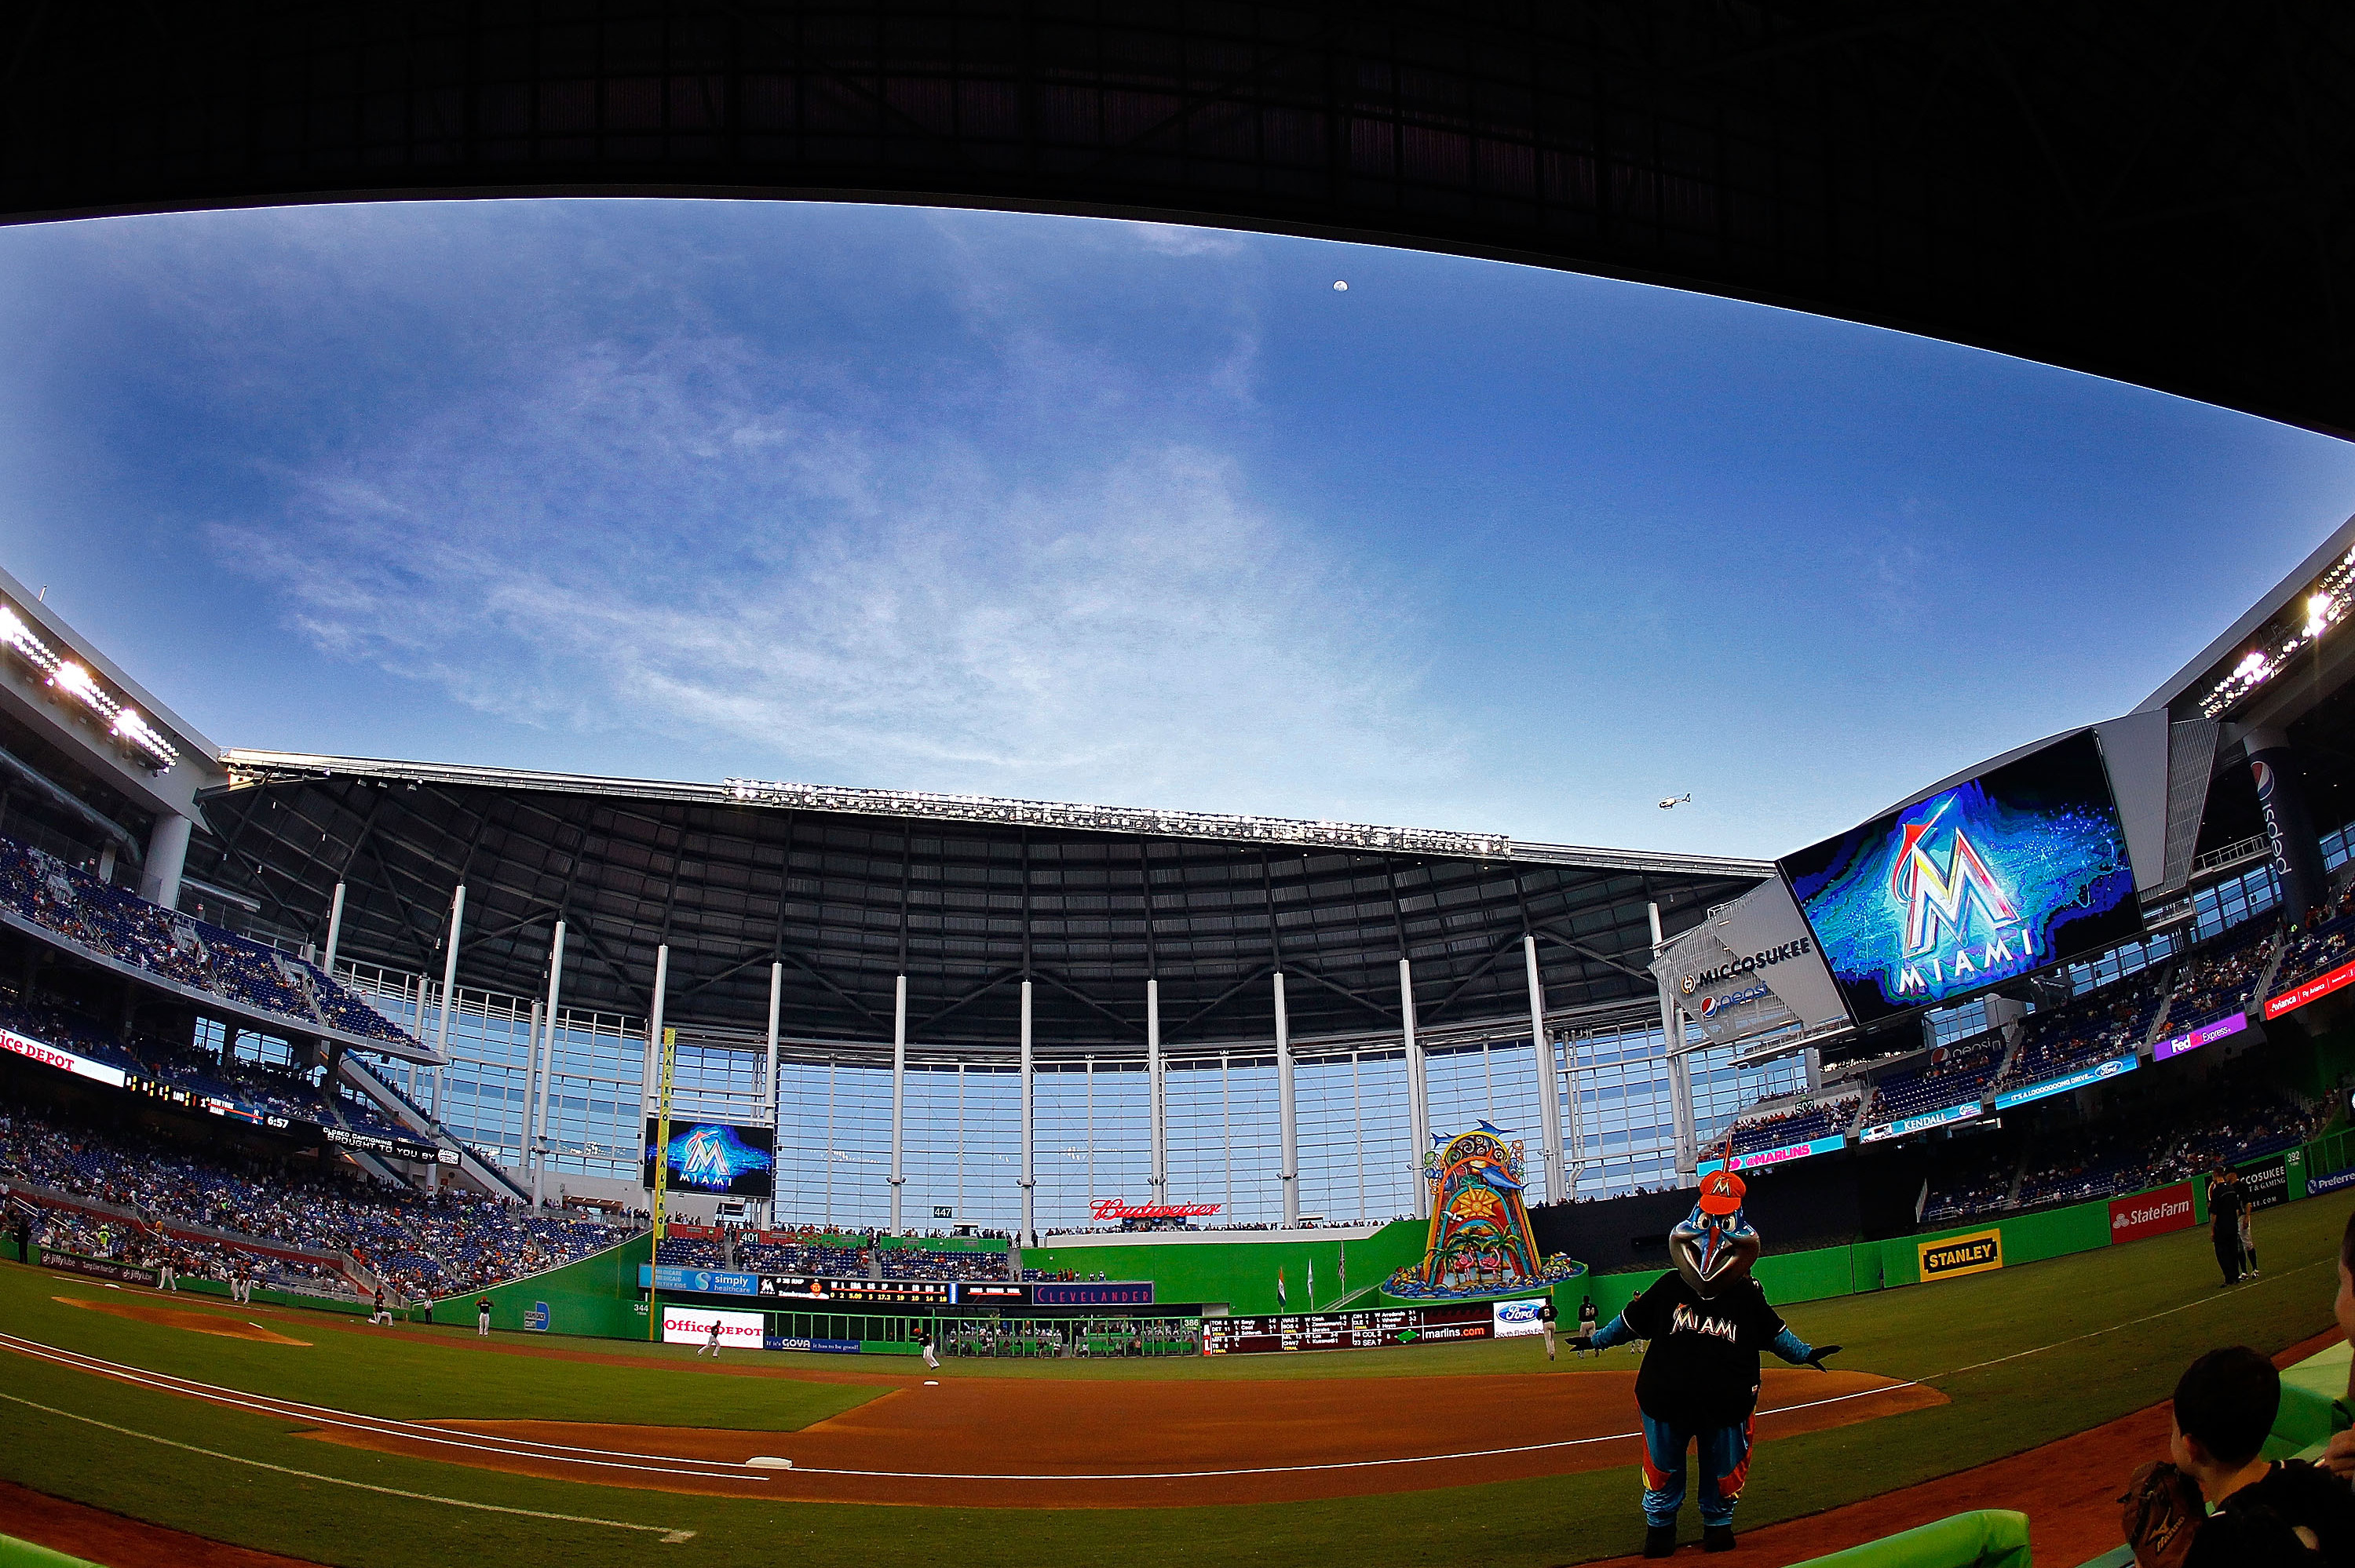 Miami Marlins: Changing team colors and ballpark for the better